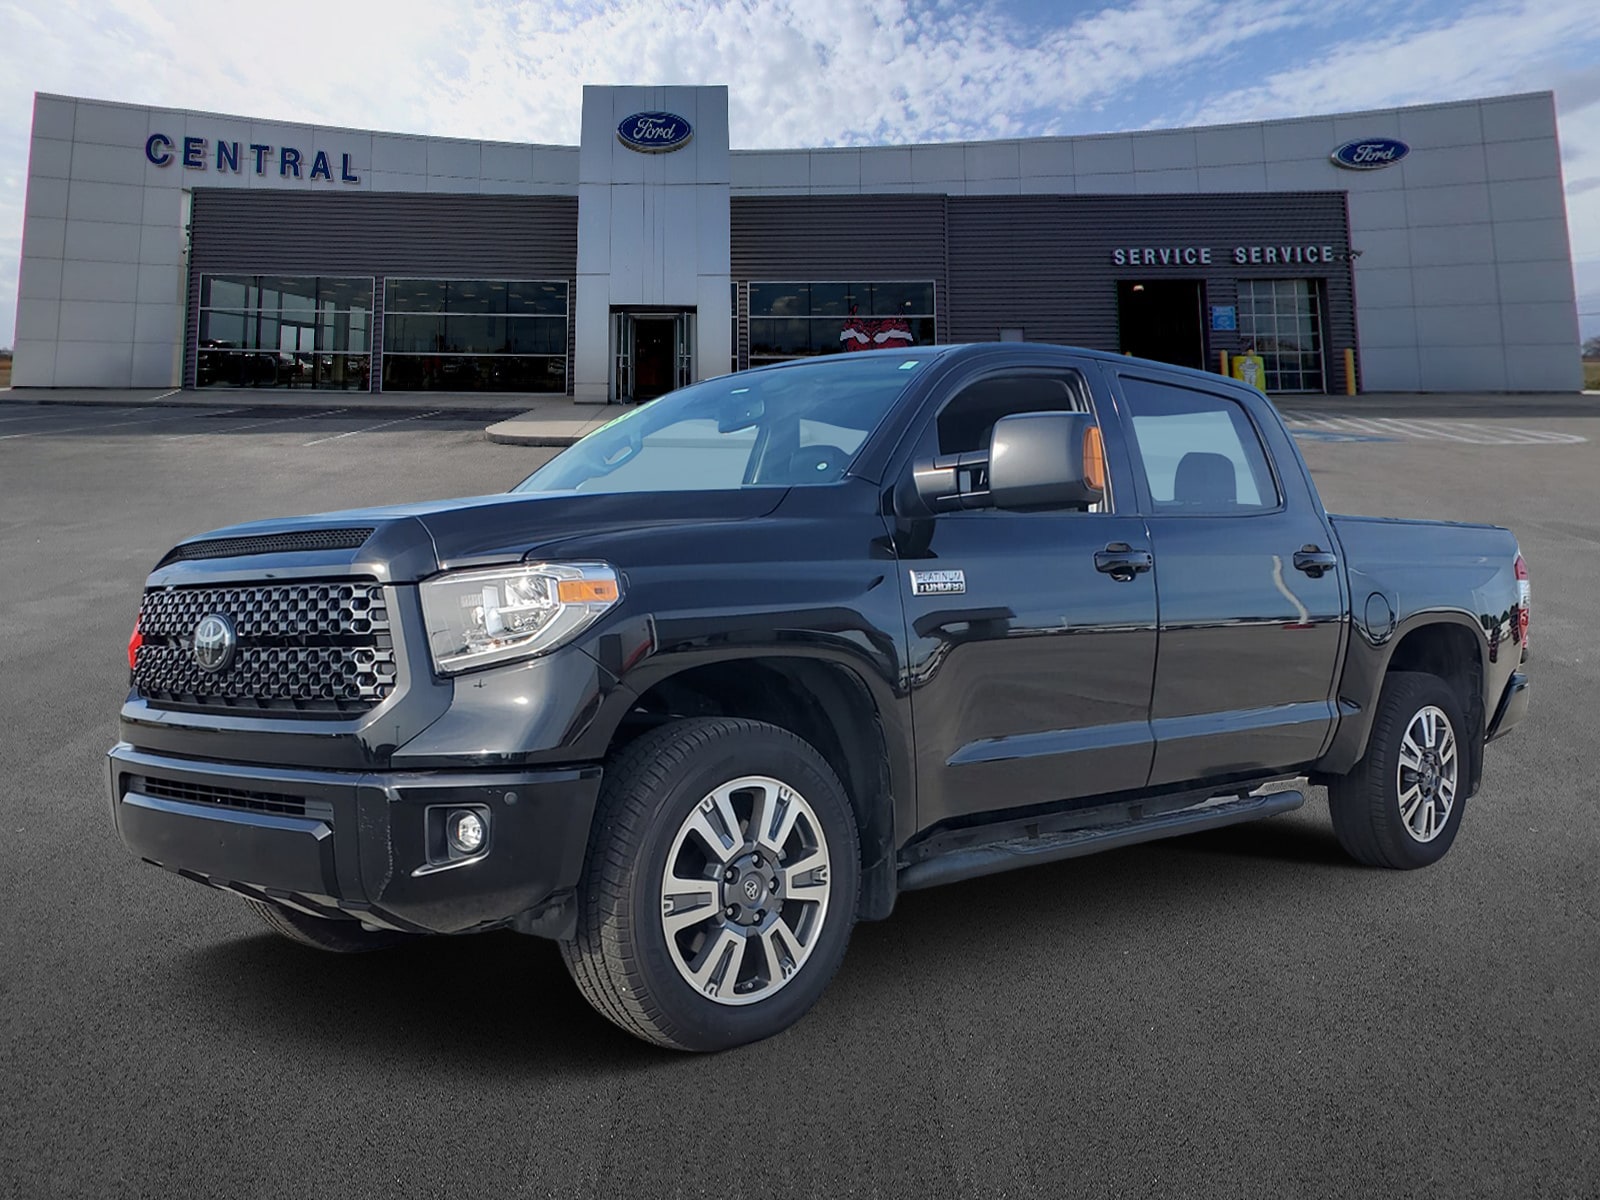 Used 2019 Toyota Tundra 1794 Truck CrewMax for Sale in Trumann, AR